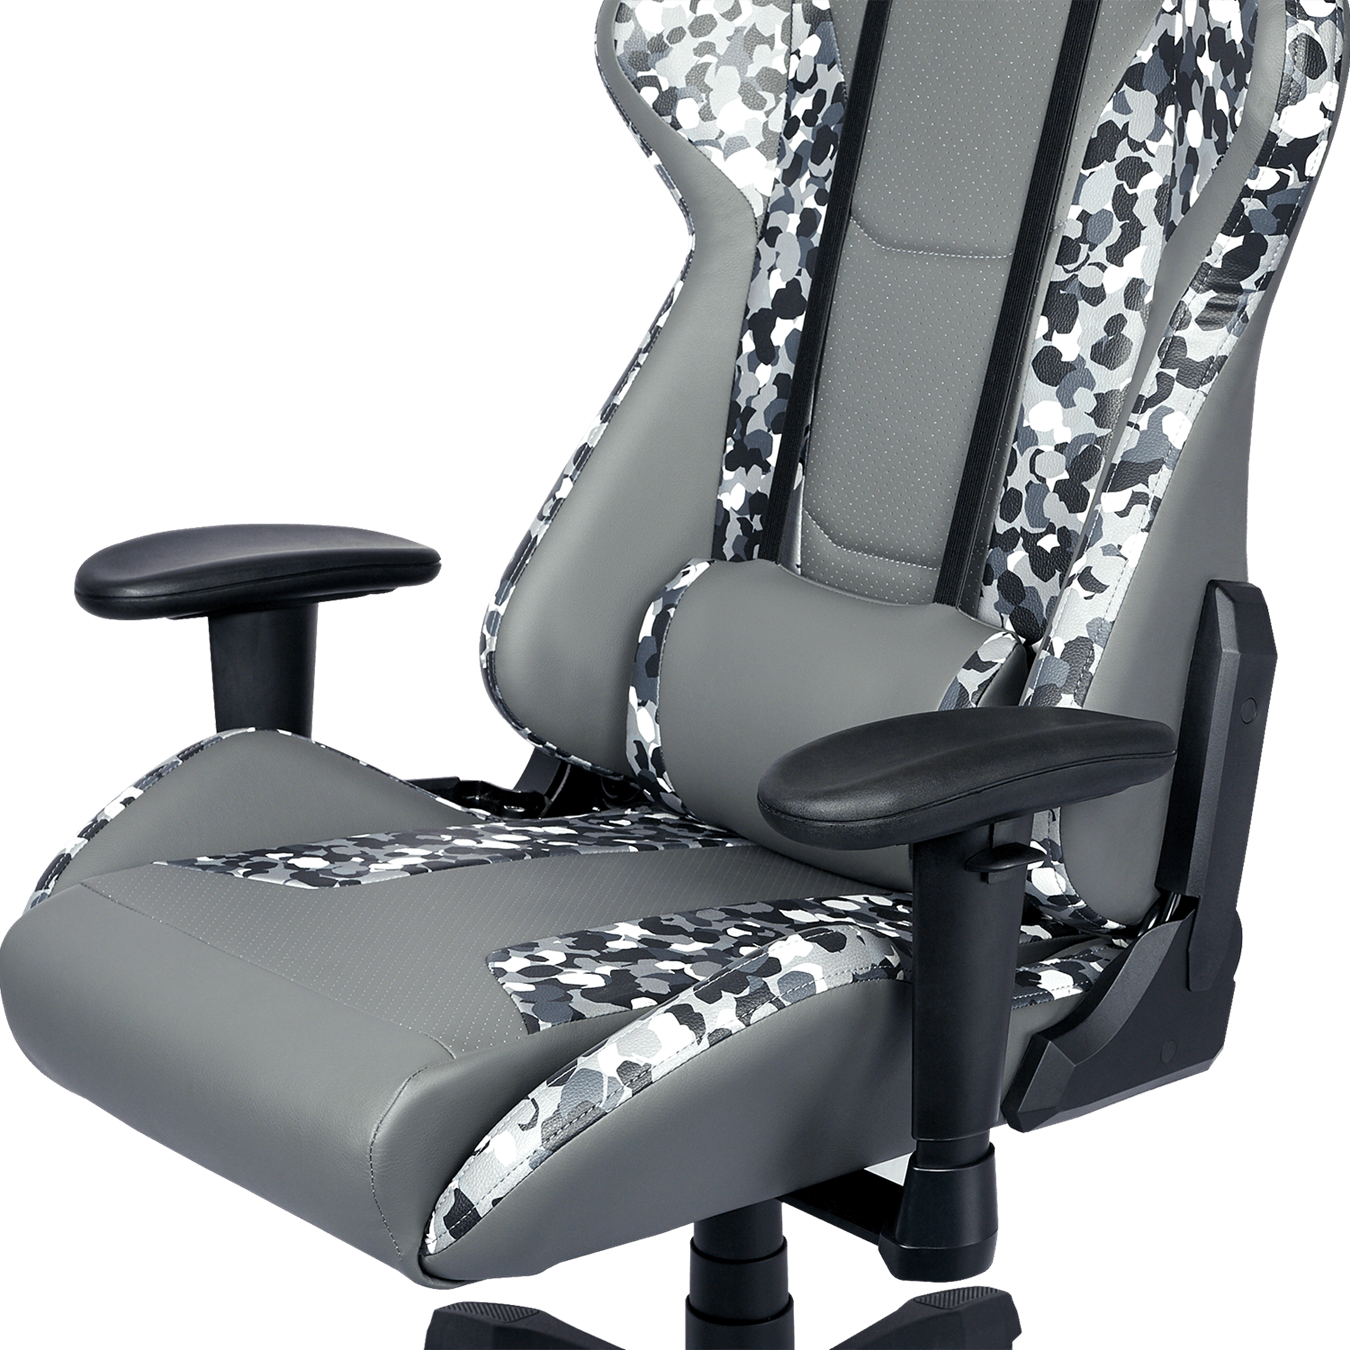 Caliber R1S Dark Knight CAMO Gaming Chair - Provides maximum comfort for all body types and keeps you feeling cool by allowing air flow and evaporation.